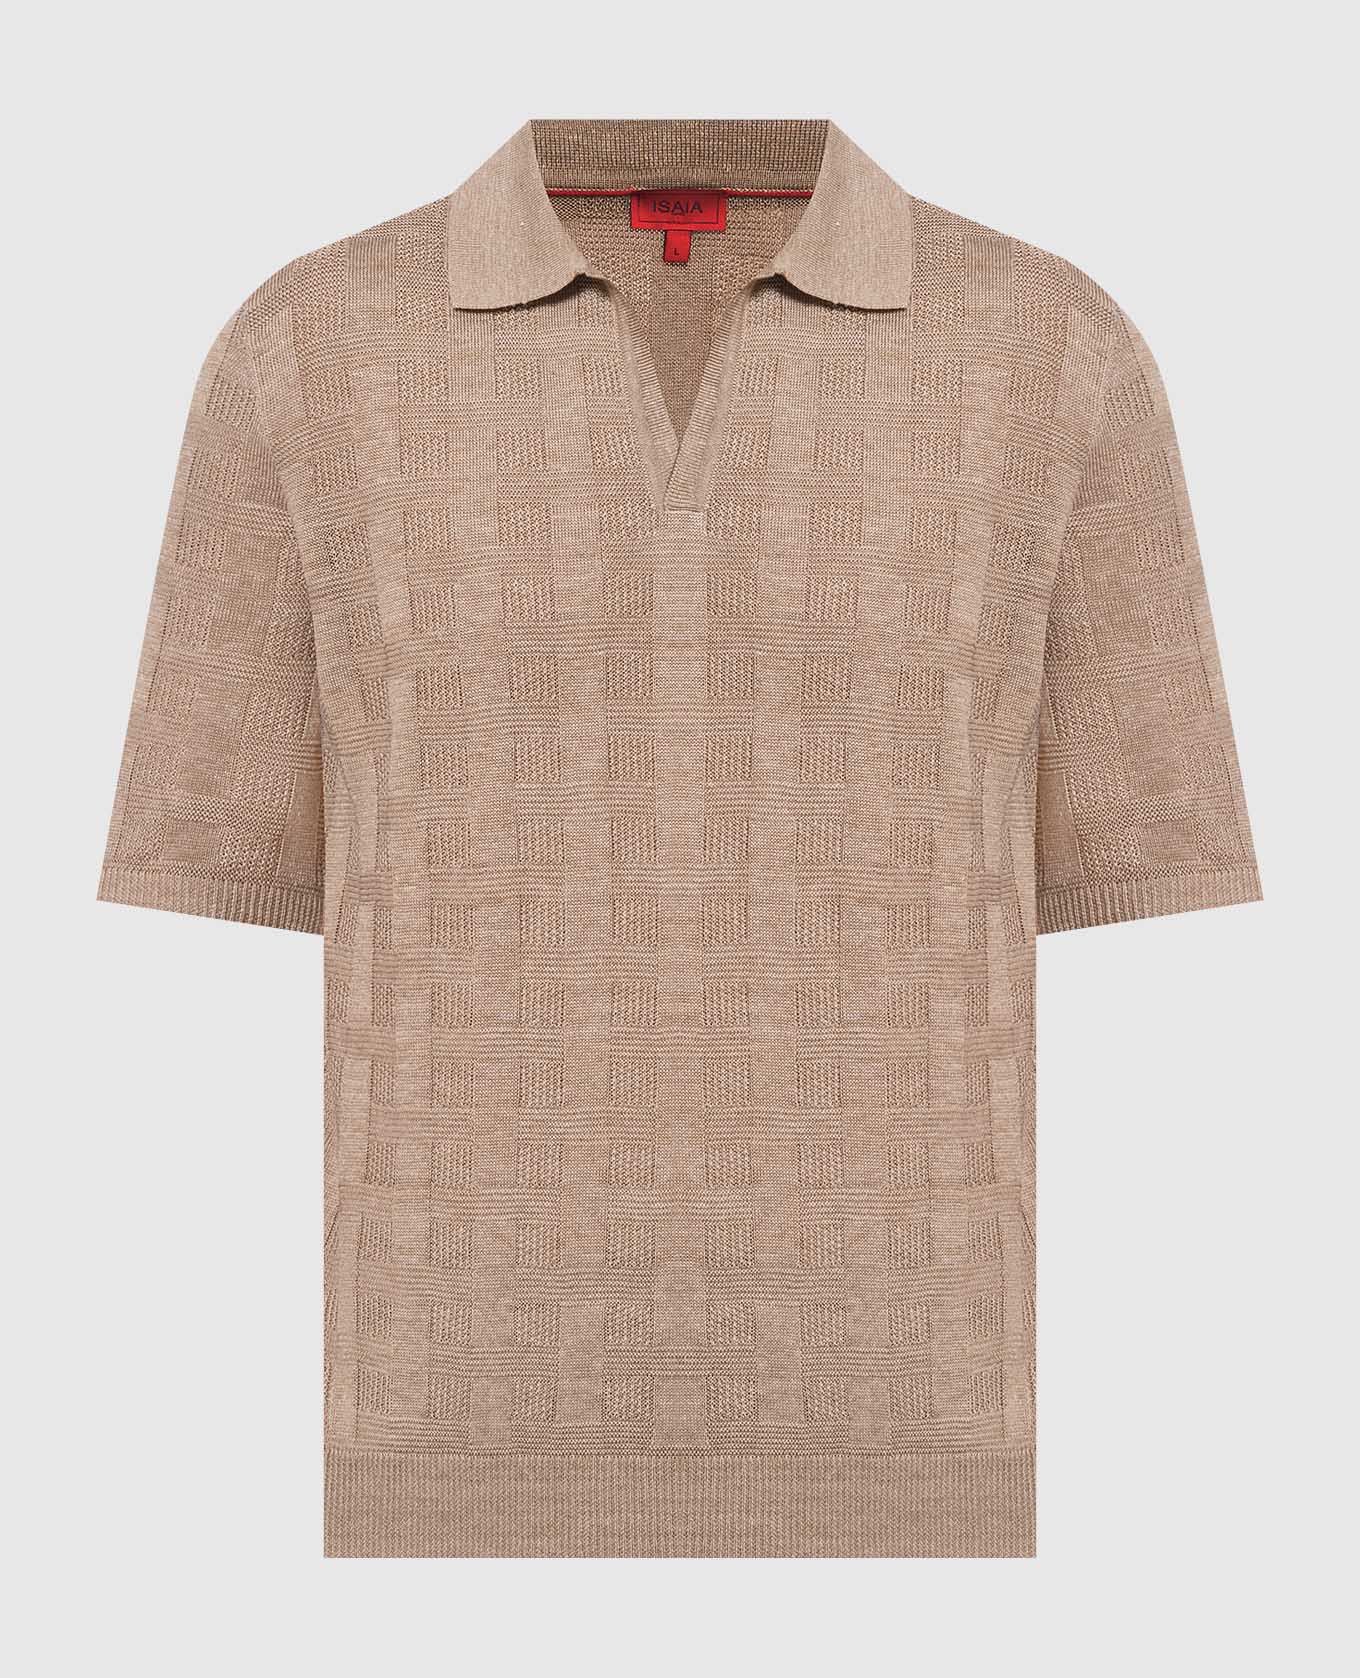 Brown polo shirt made of linen and silk in a woven pattern